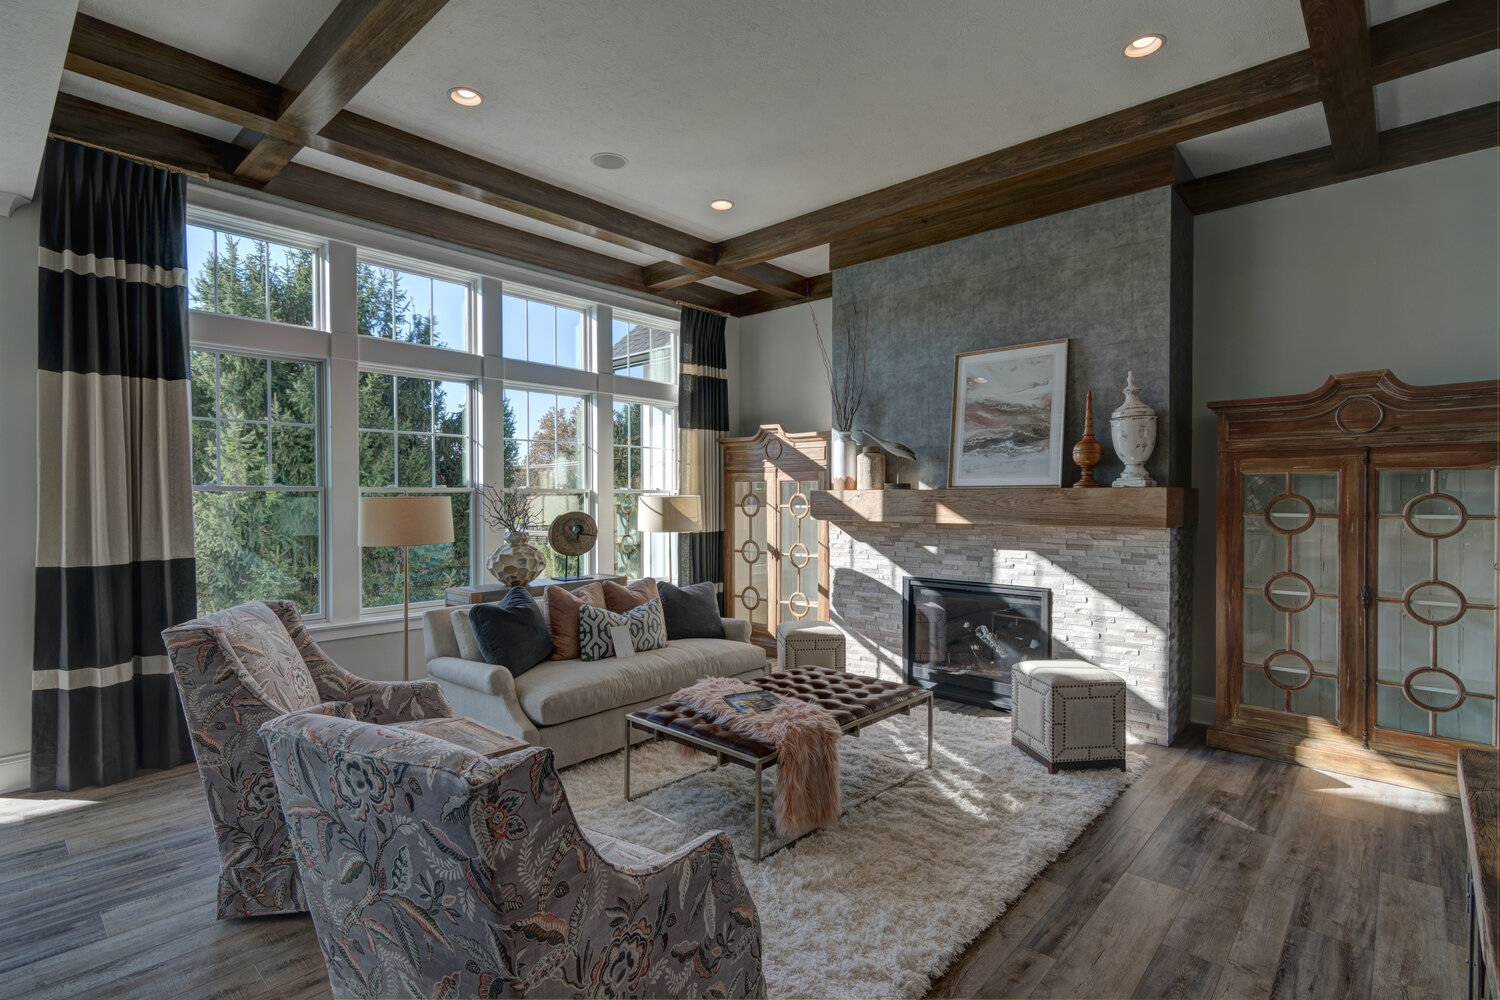 While you may notice the fireplace and wood beams, your touring partner might comment on how much natural light comes through.